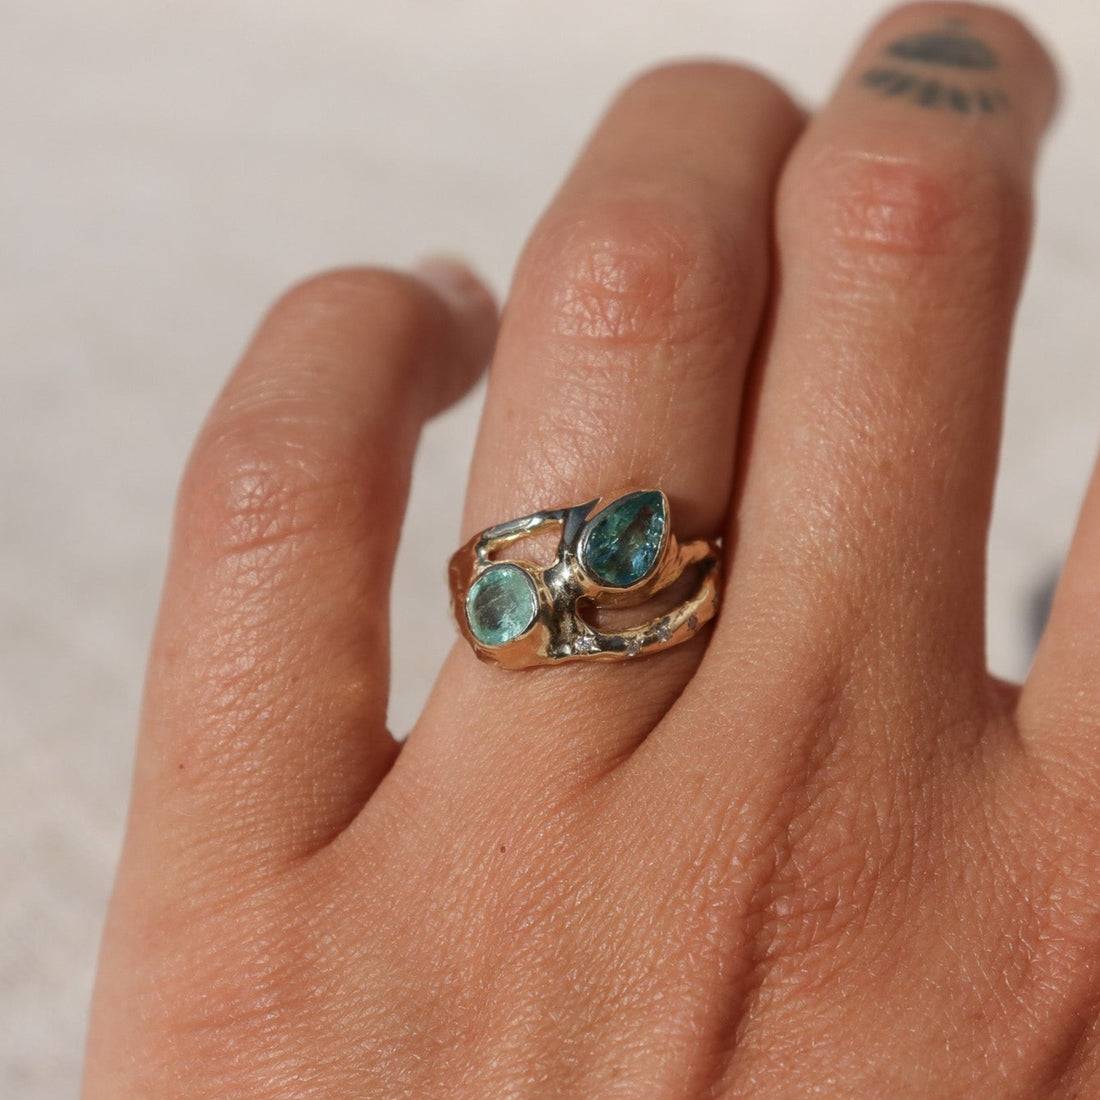 Exquisite ring featuring two vibrant Paraiba tourmalines elegantly bezel-set along a wide, organically shaped band, worn on a finger to depict scale.